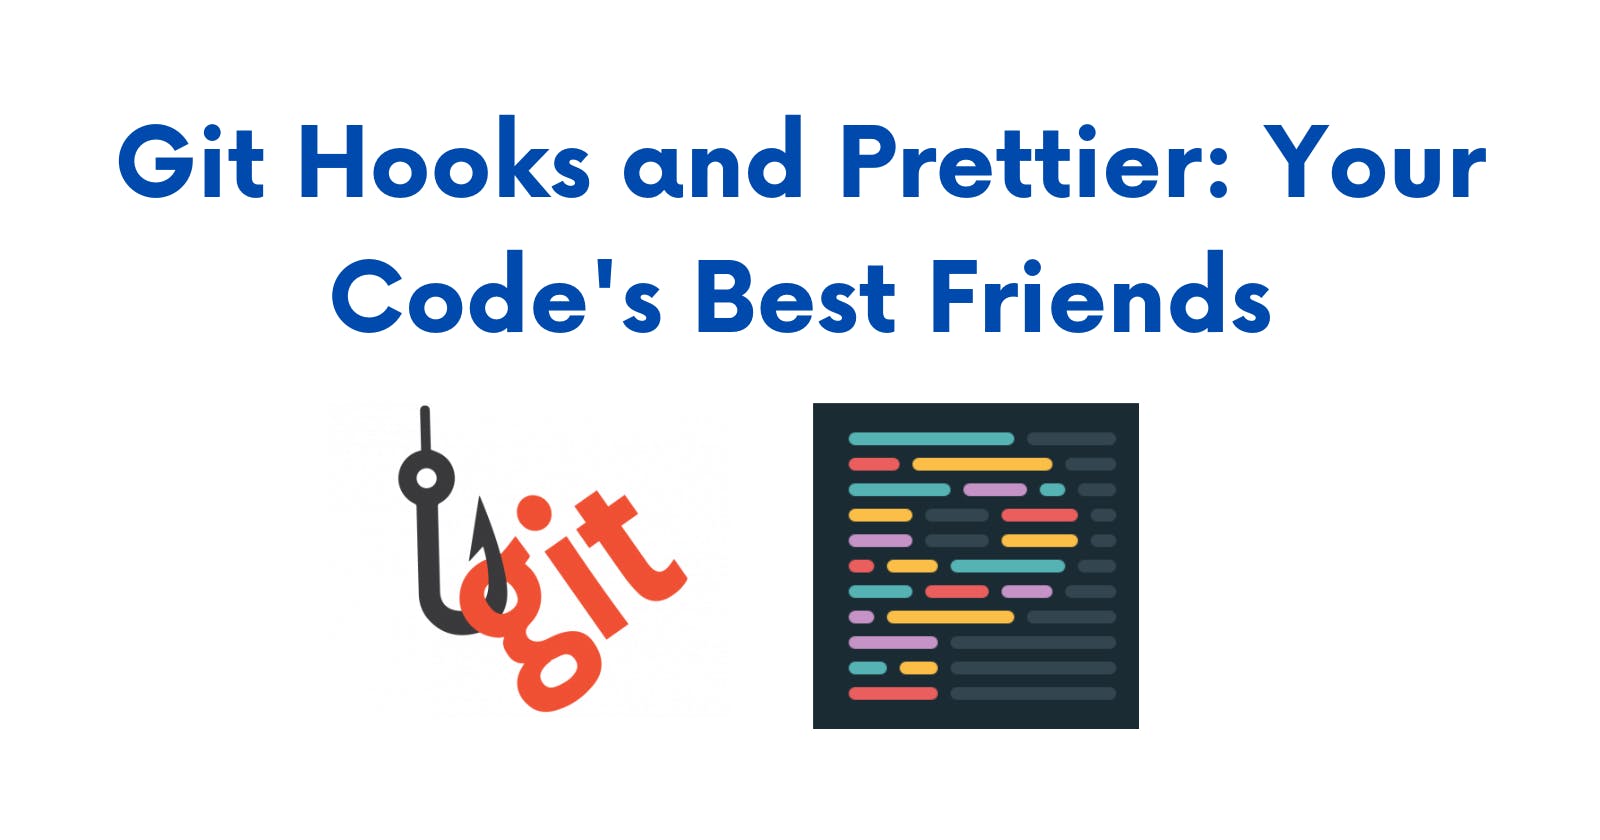 Git Hooks and Prettier: Your Code's Best Friends